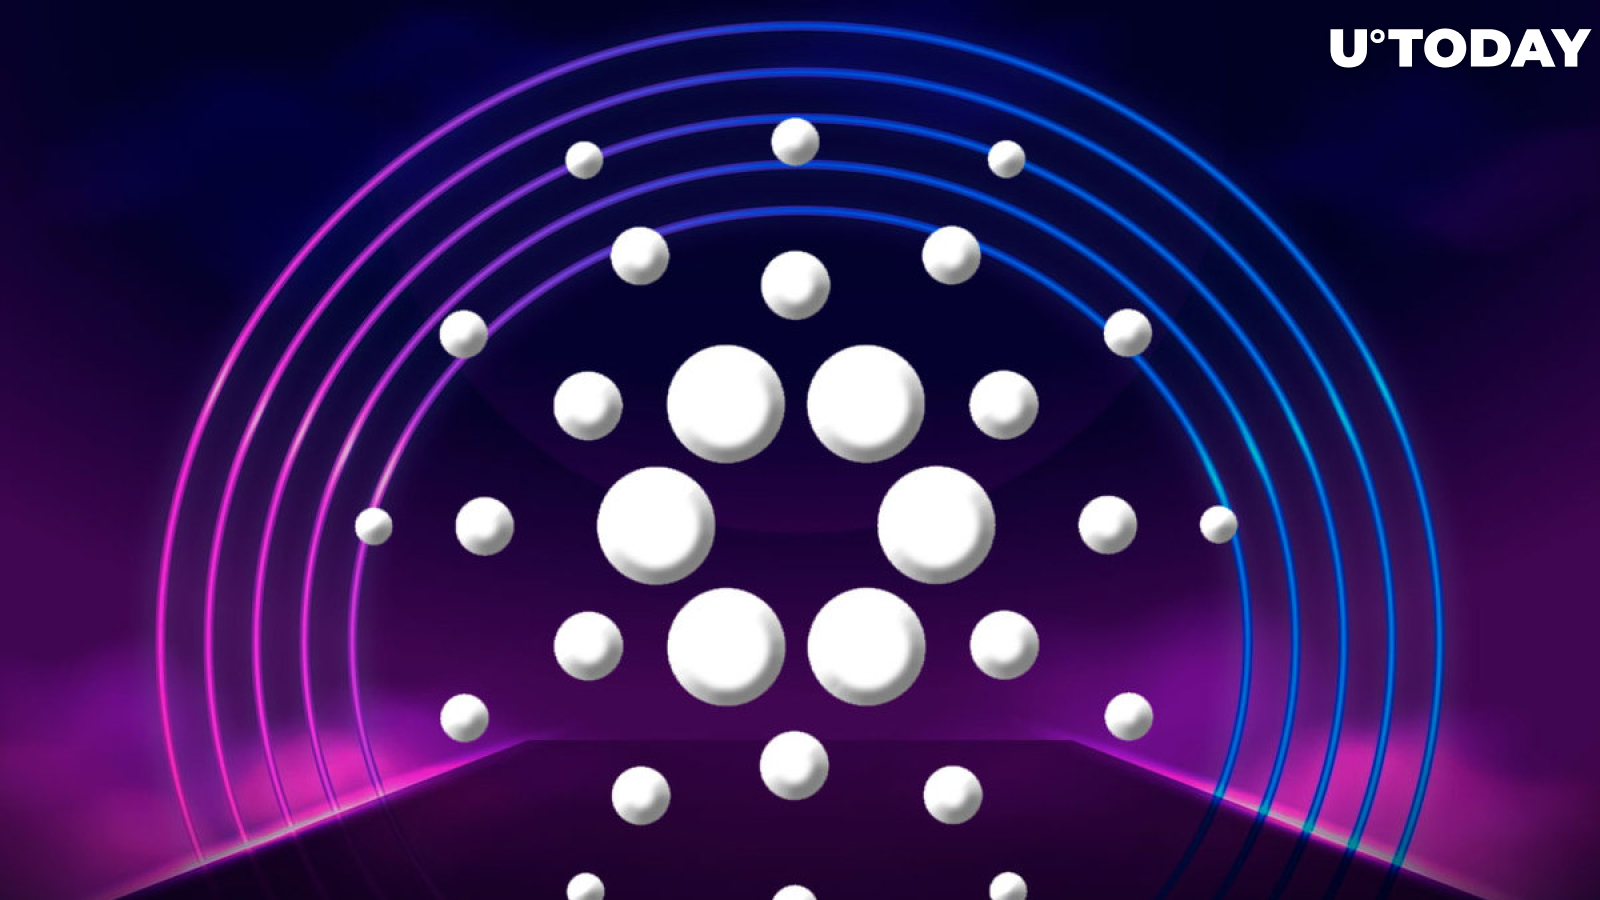 Cardano Becomes Most Actively Developed Project in Crypto Industry